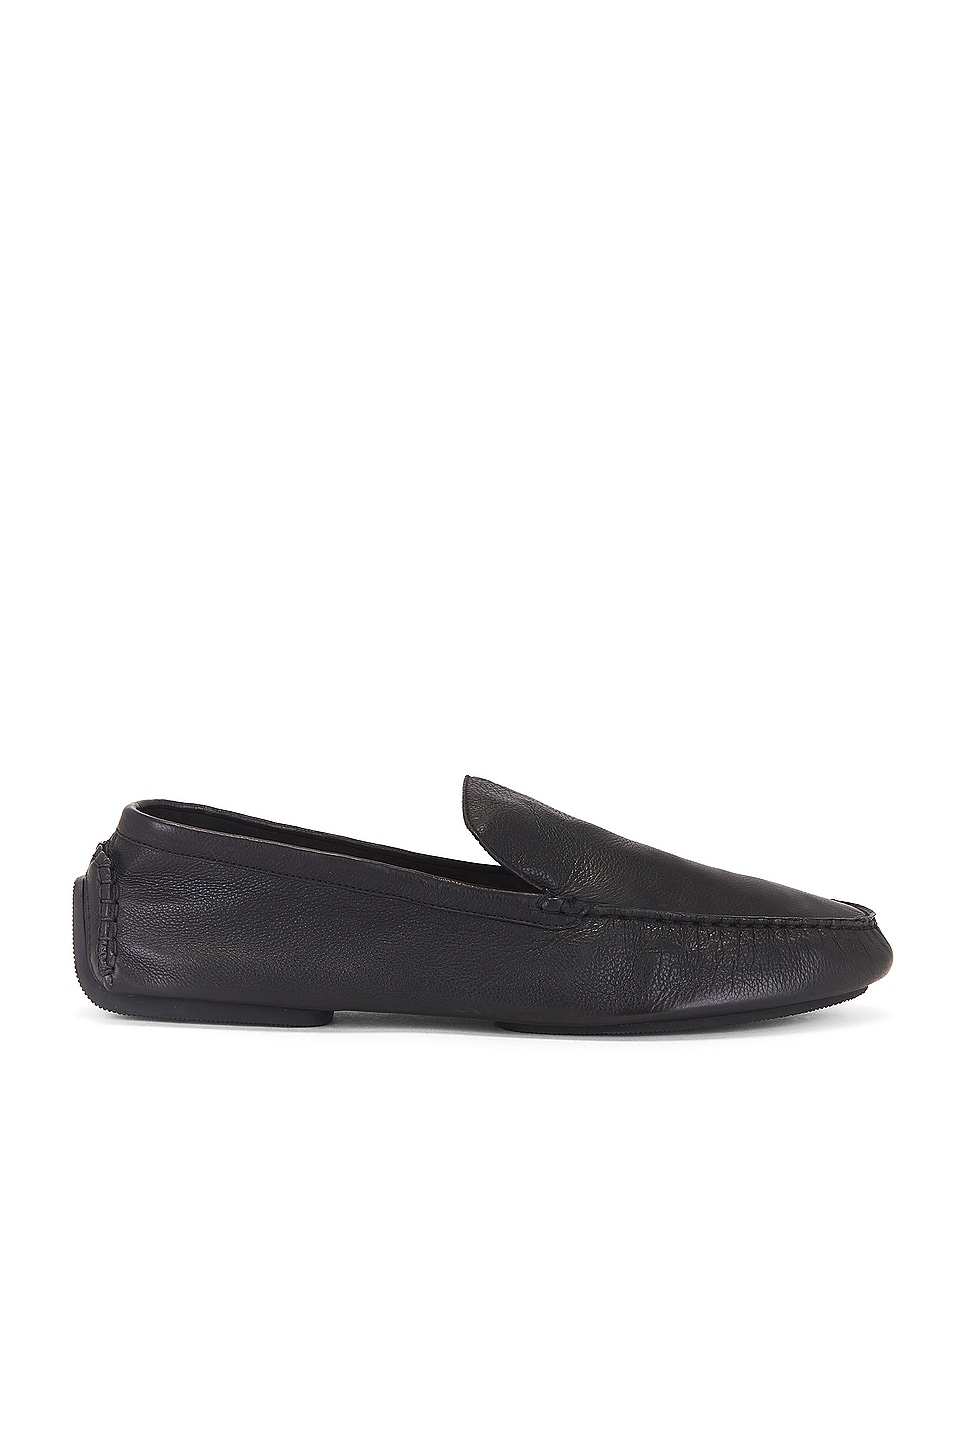 Image 1 of The Row Lucca Slip On in Black